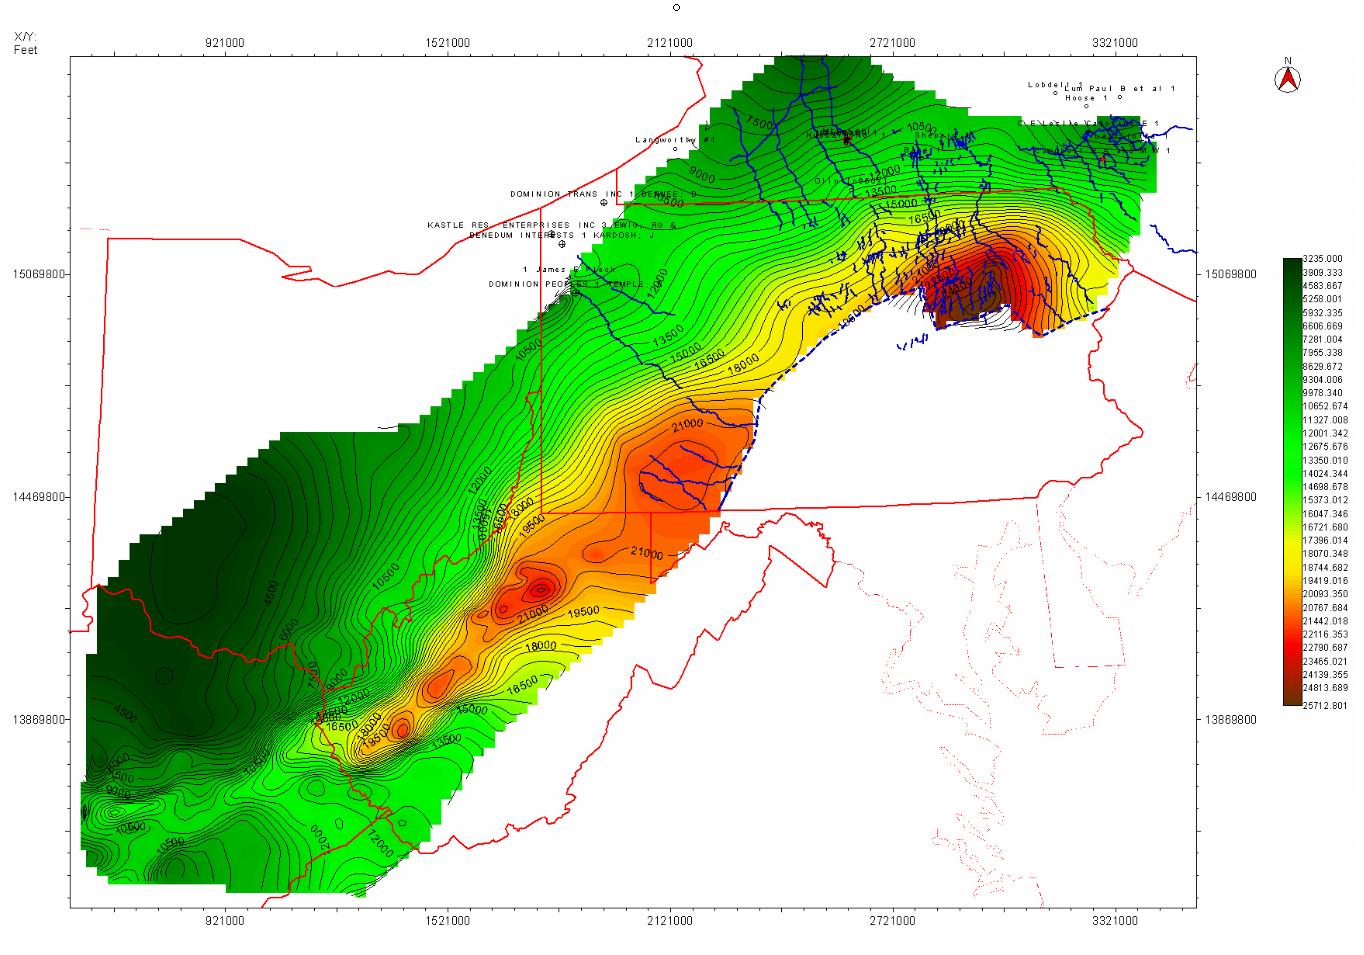 Figure 13.  Structure contour map of the top of the basement in the Northern Appalachian Basin (faults not shown here).  The structure of the basement is a result of Cambrian rifting and later Alleghanian compression and foreland basin formation.